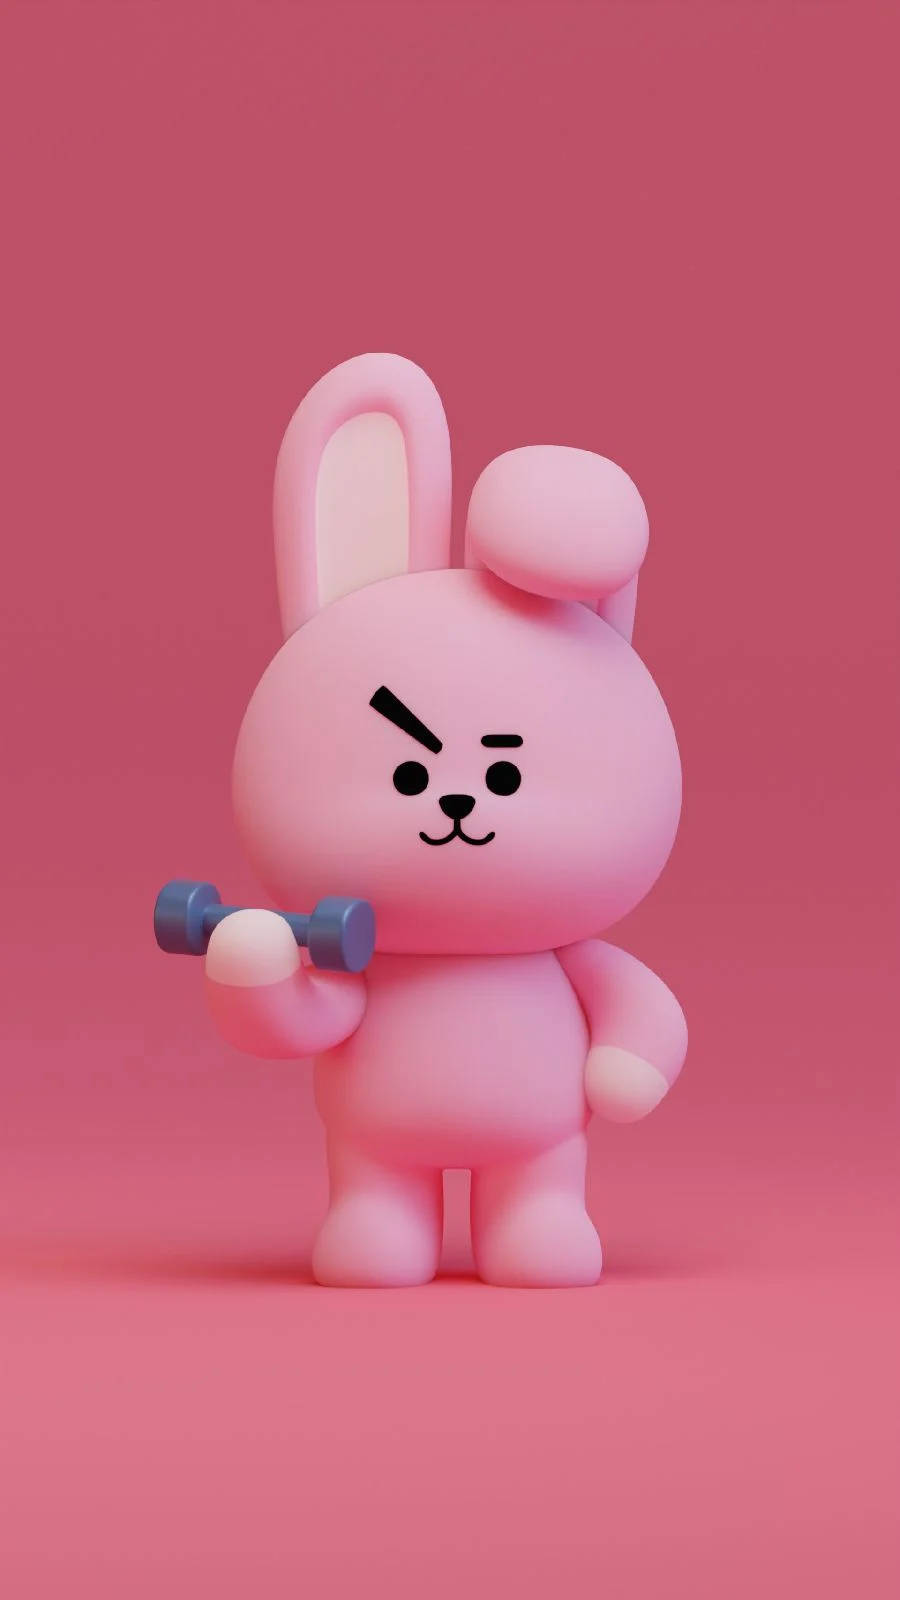 Cooky Bt21 Statue Background